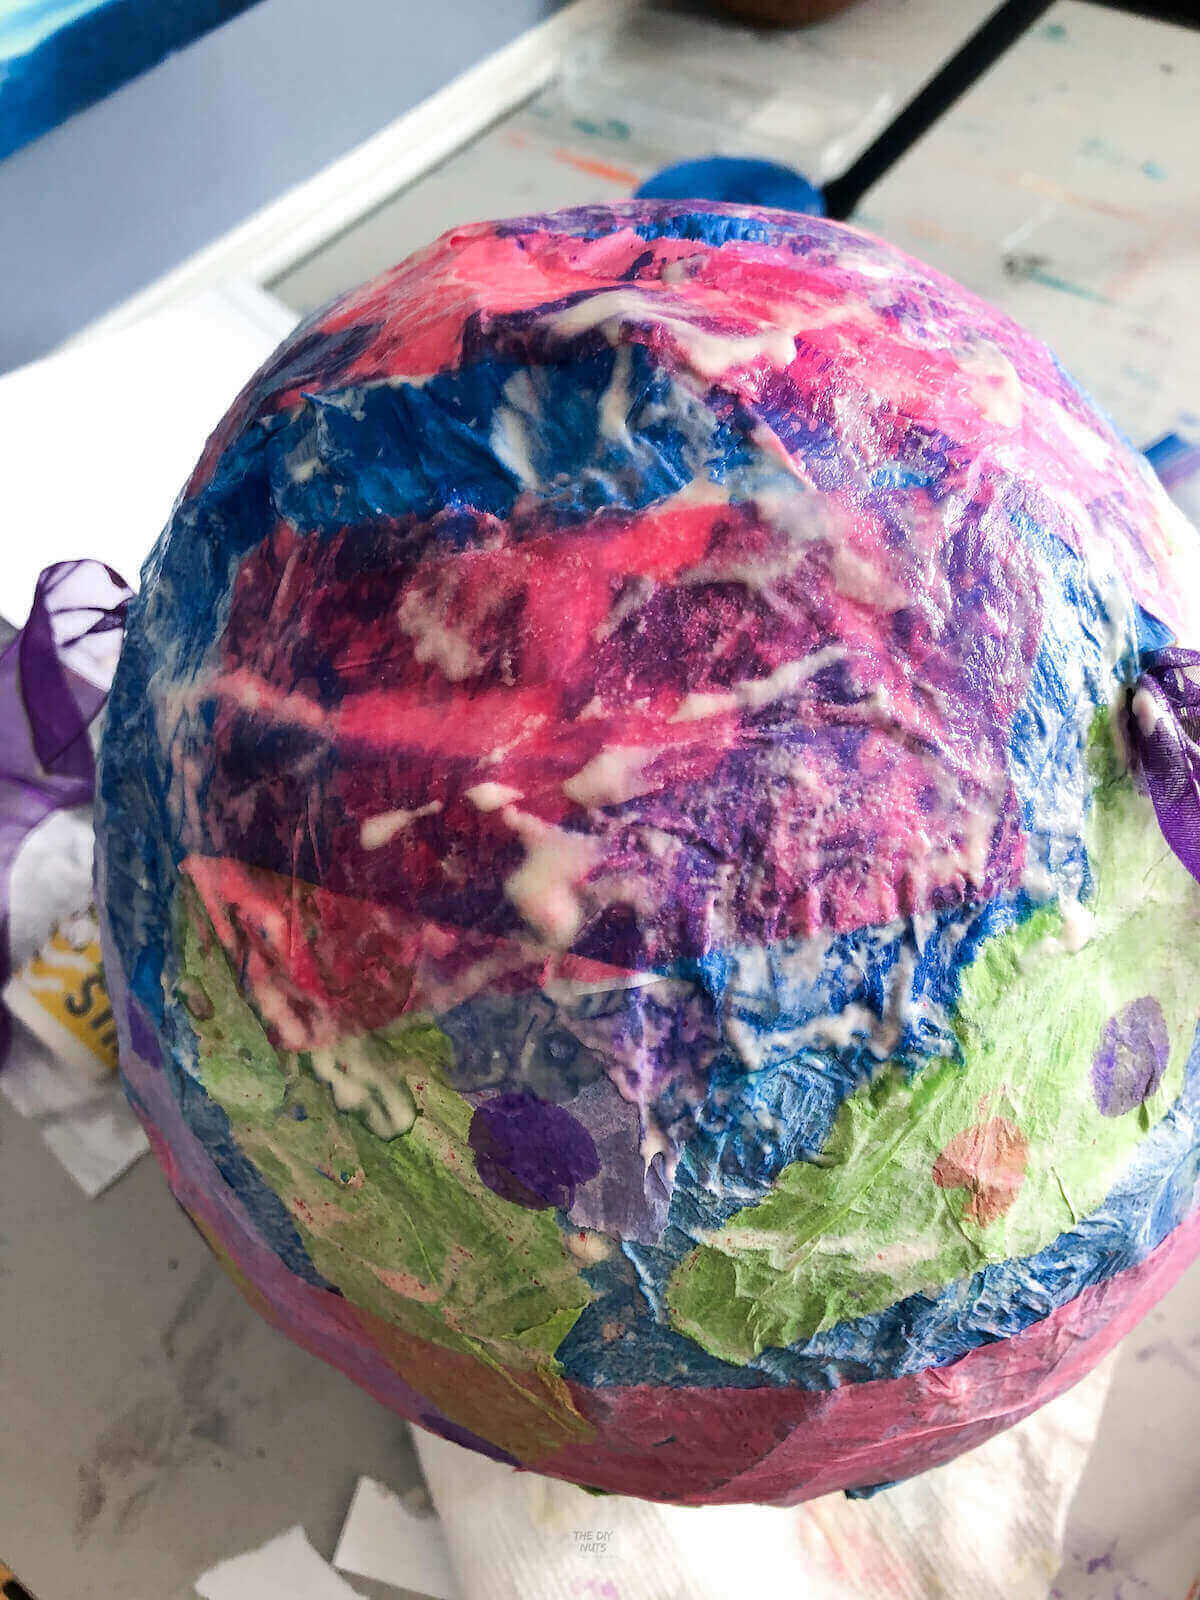 pink, purple and green wet tissue paper with flour mixture on it.